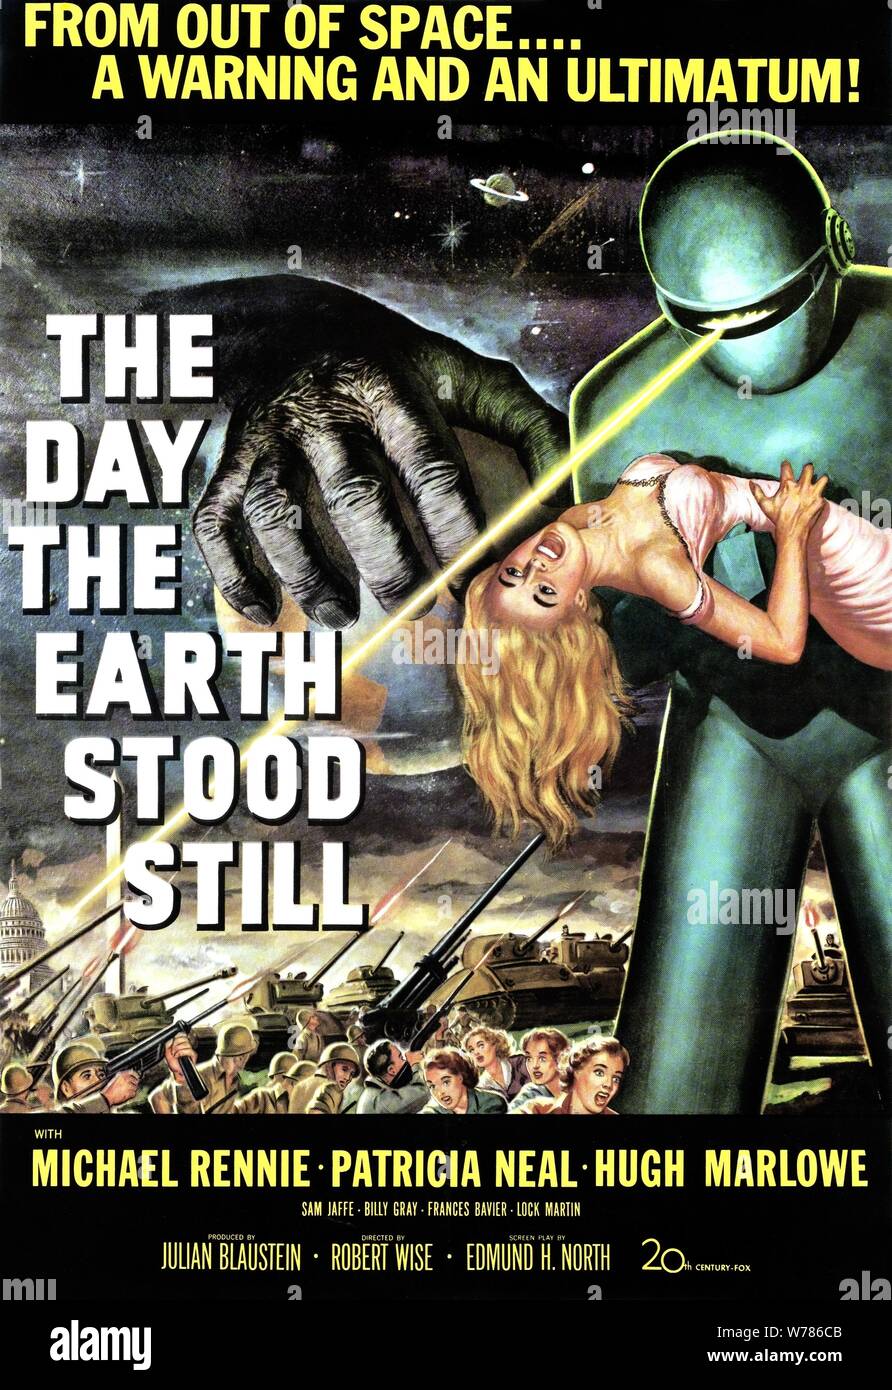 MOVIE POSTER, THE DAY THE EARTH STOOD STILL, 1951 Stock Photo